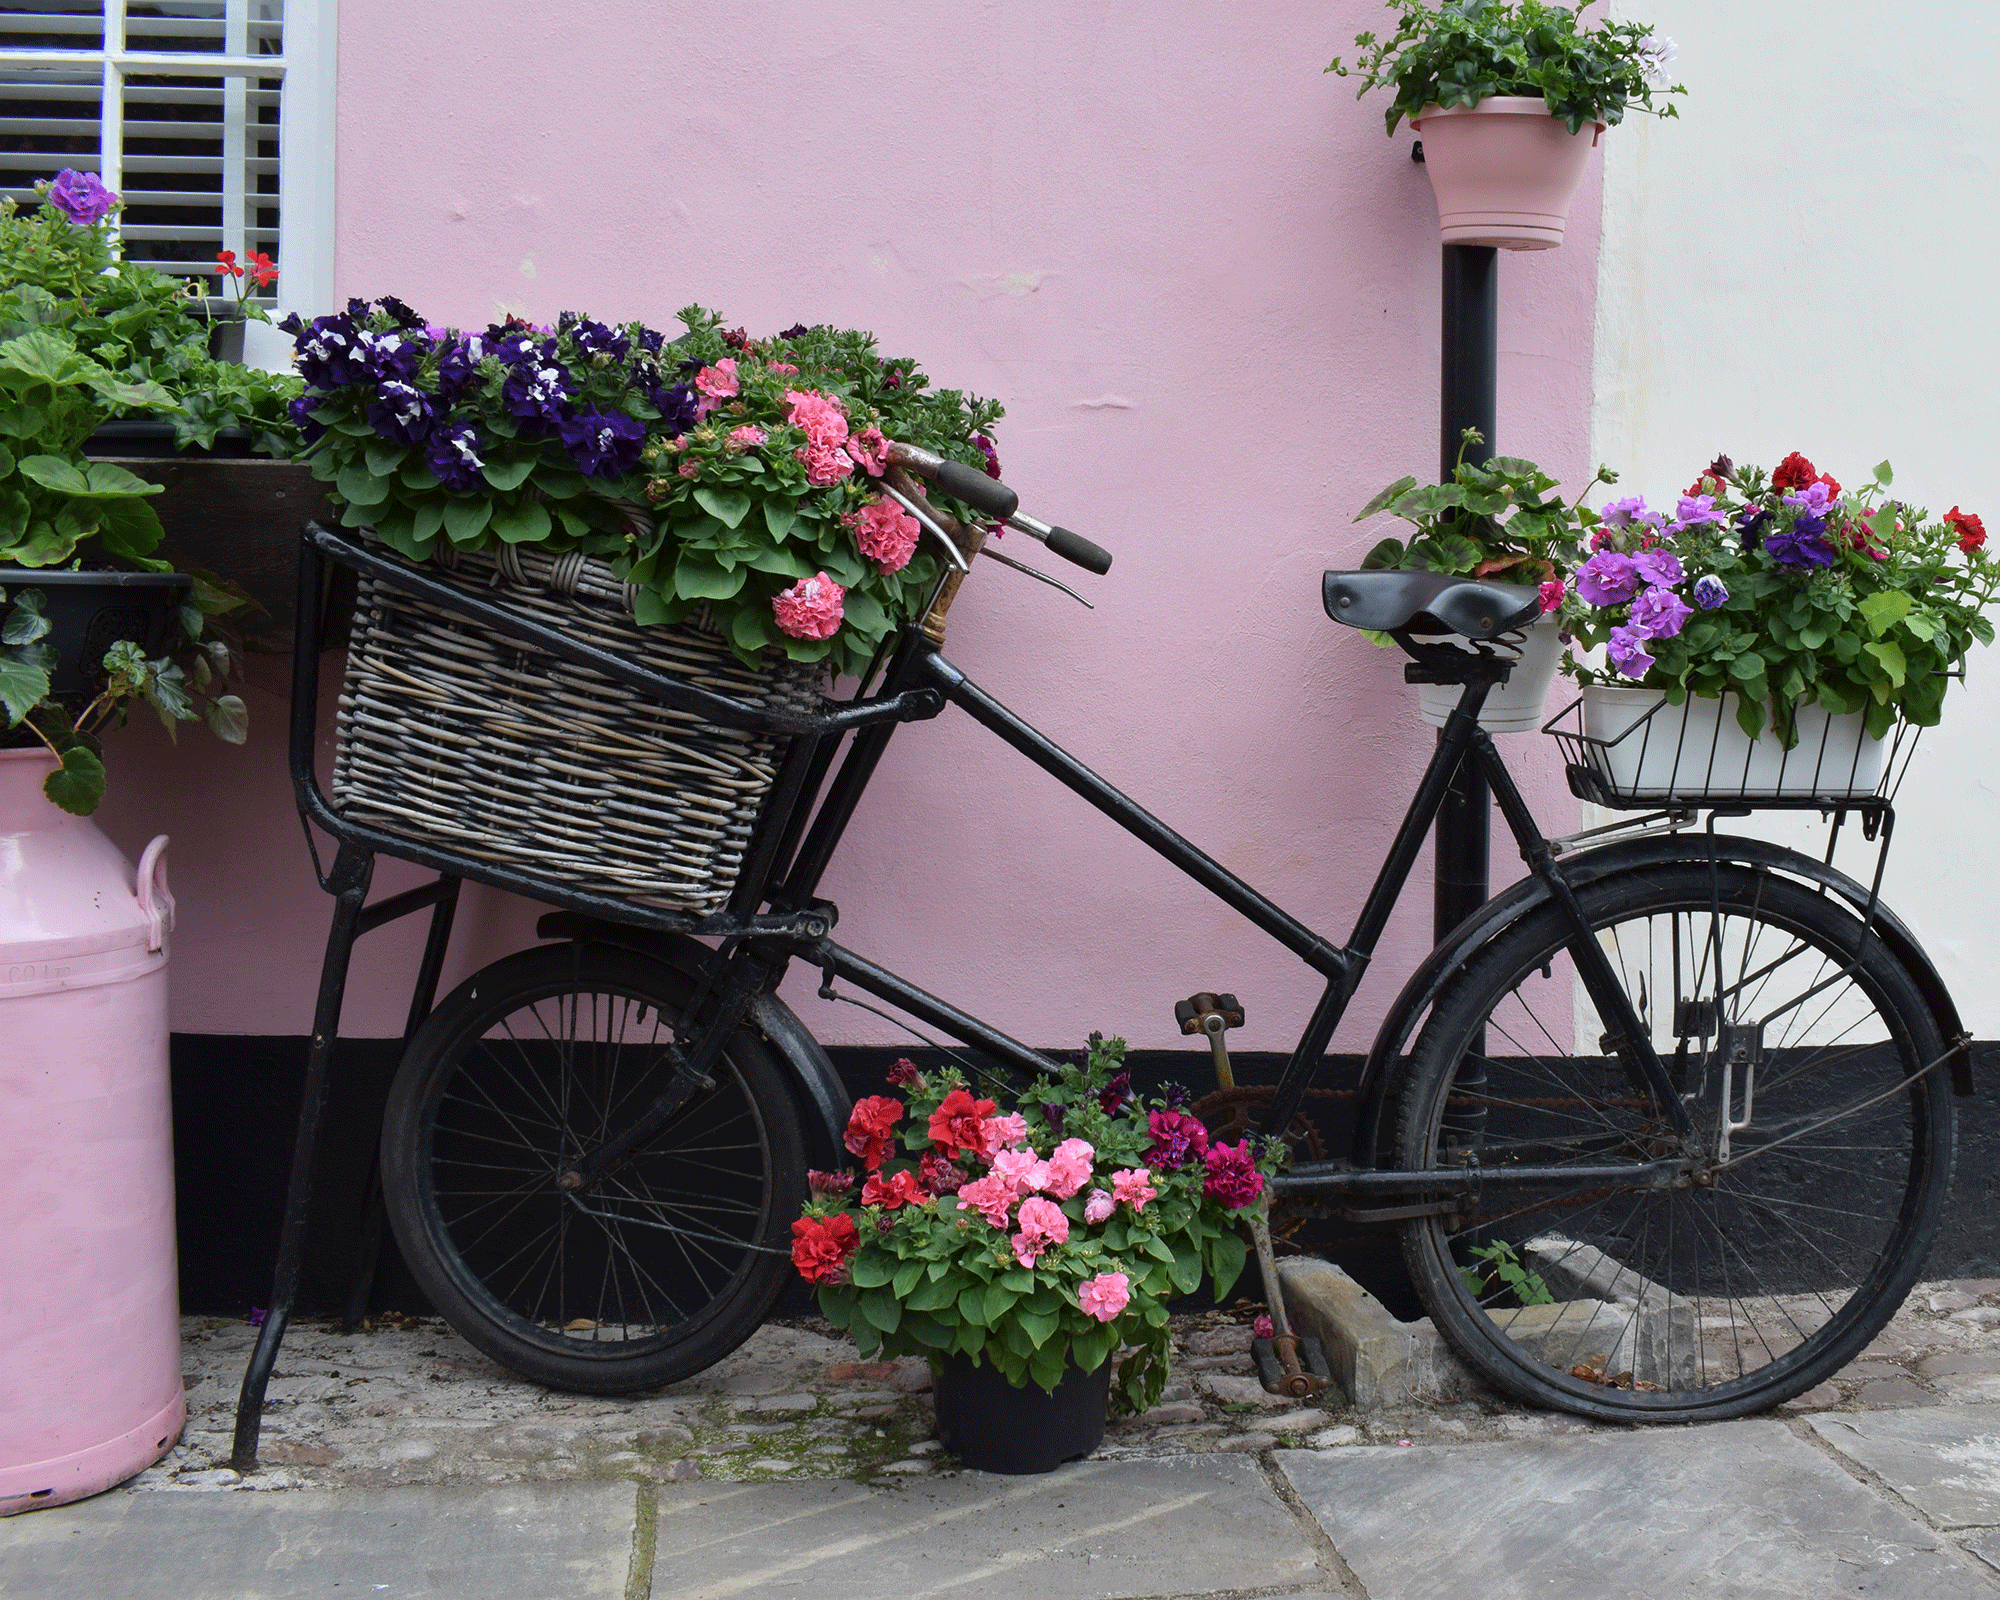 A bicycle being used as a planter displayed at front of house with pink external paint decor